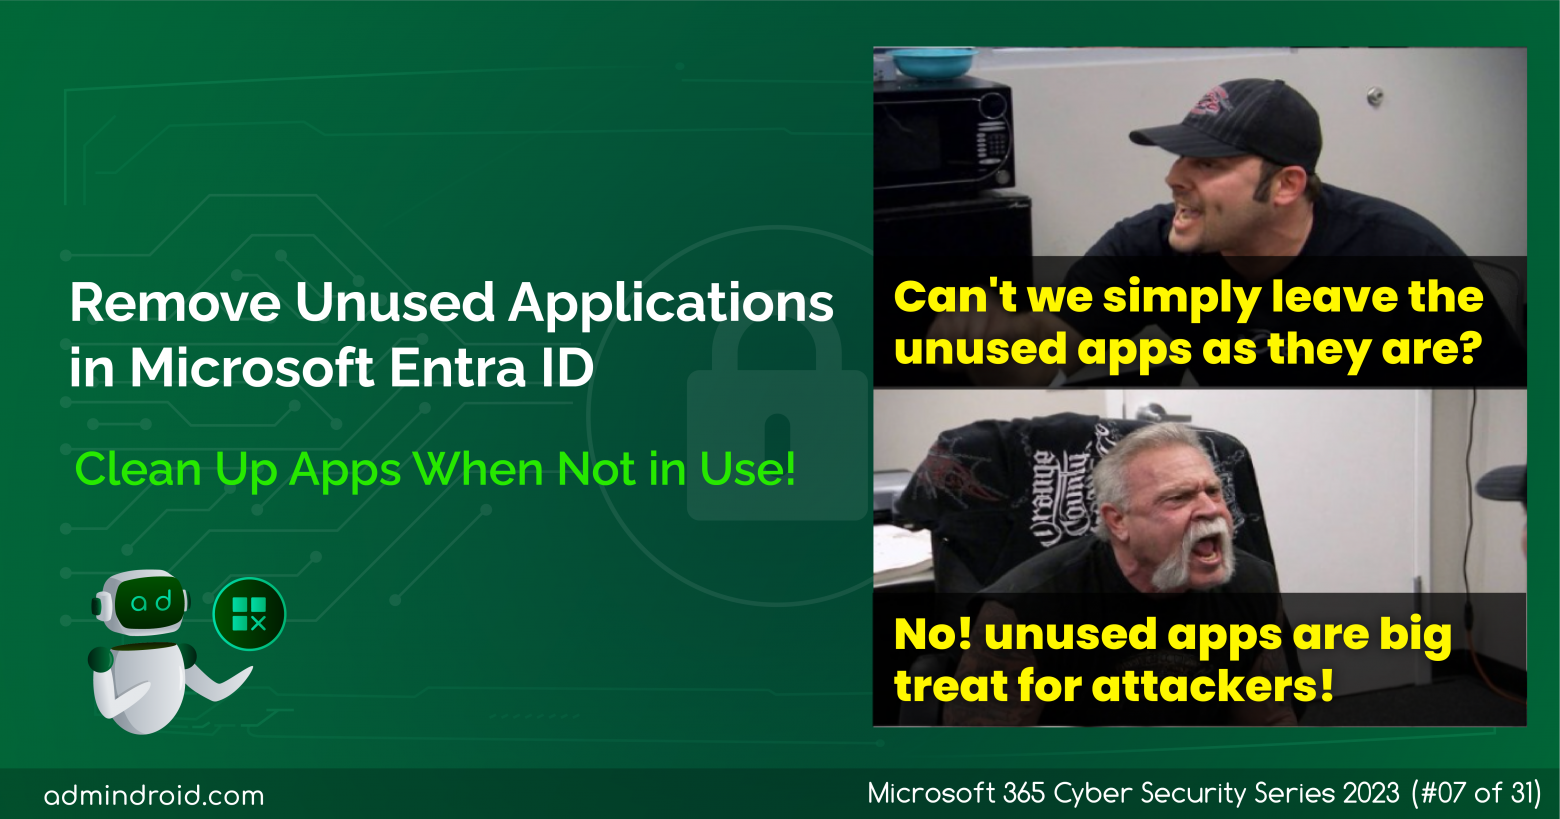 Entra ID Best Practices – Remove Unused Applications in Microsoft Entra ID for Security